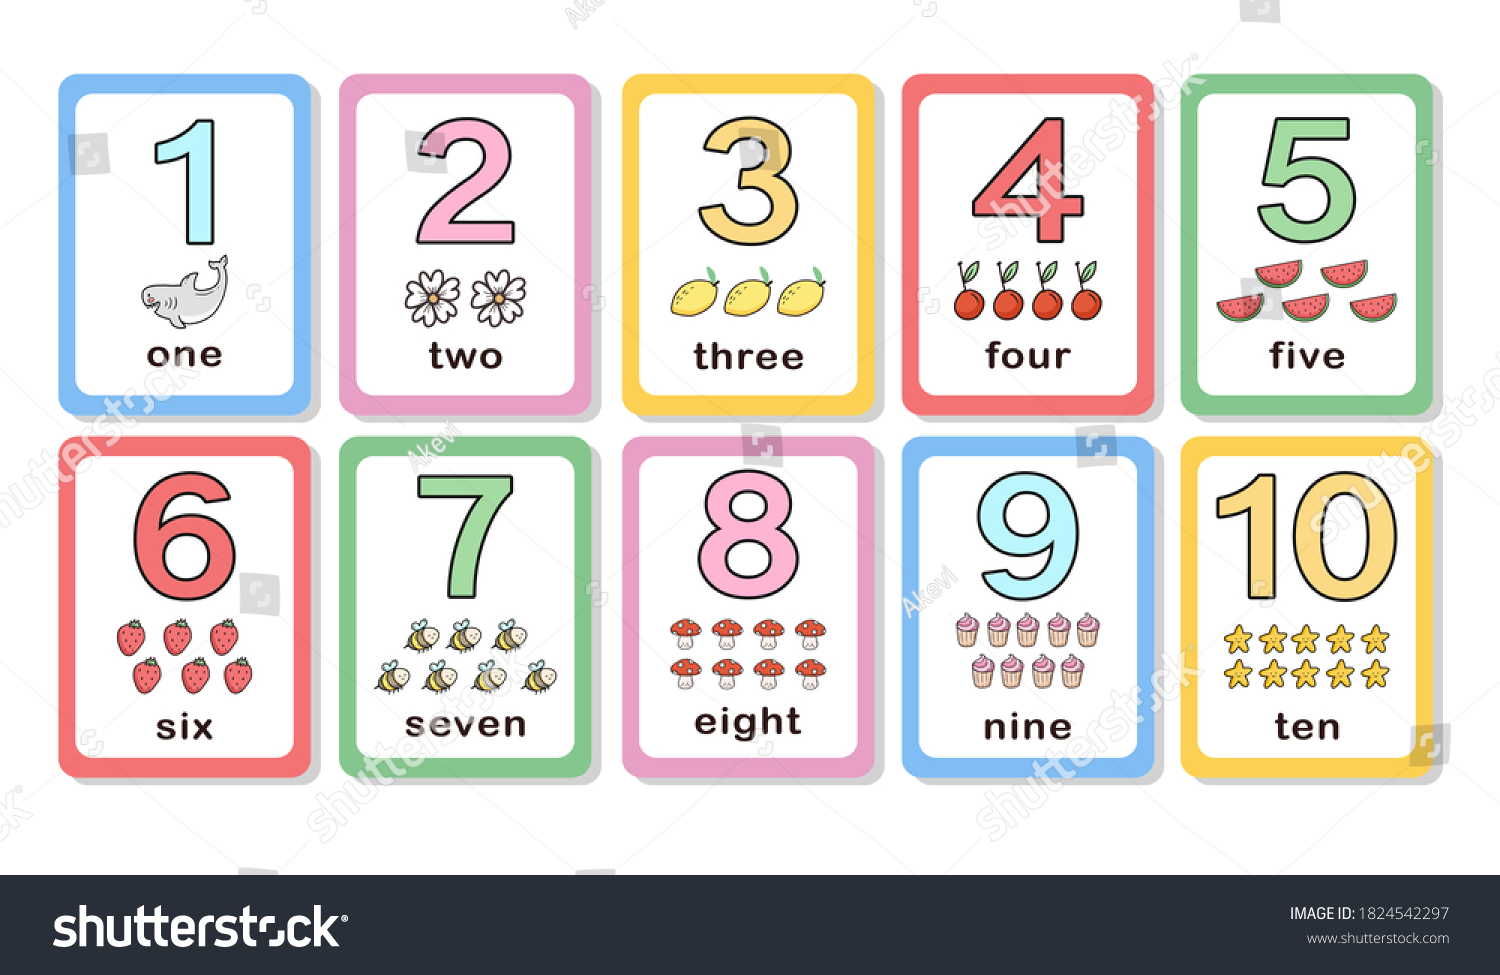 Flashcard Cute Number Count Kids Learning Stock Vector (Royalty Free ...